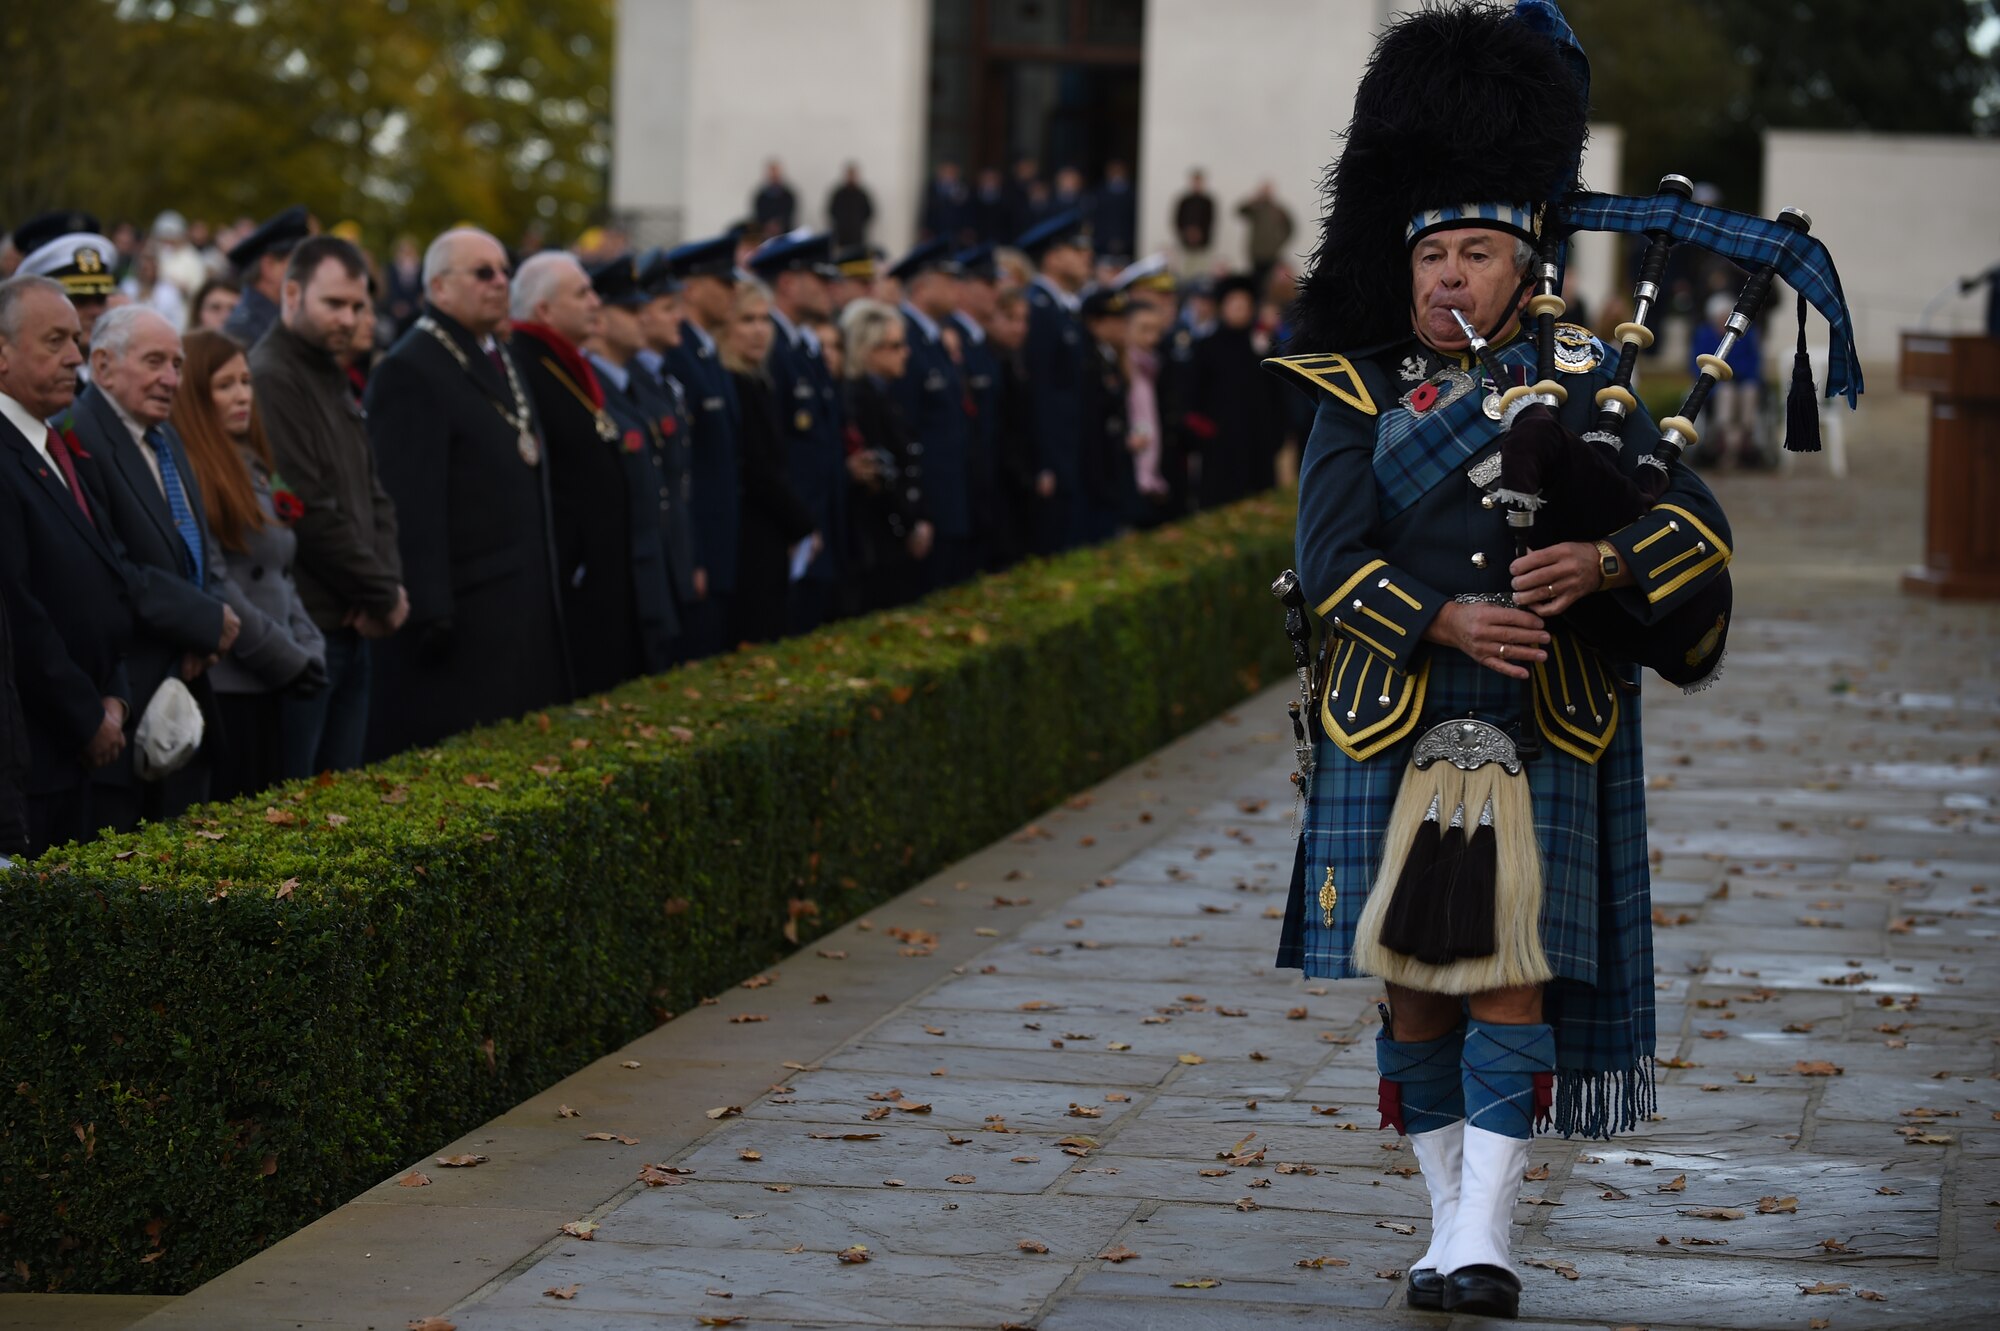 Retired Royal Air Force Warrant Officer Gary Kernaghan plays a bagpipe during a Veterans Day ceremony Nov. 11, 2014, at Cambridge American Cemetery, England. Since 1919, the United States has set aside Nov. 11 to remember the sacrifices of veterans past and present. (U.S. Air Force photo/Staff Sgt. Jarad A. Denton)